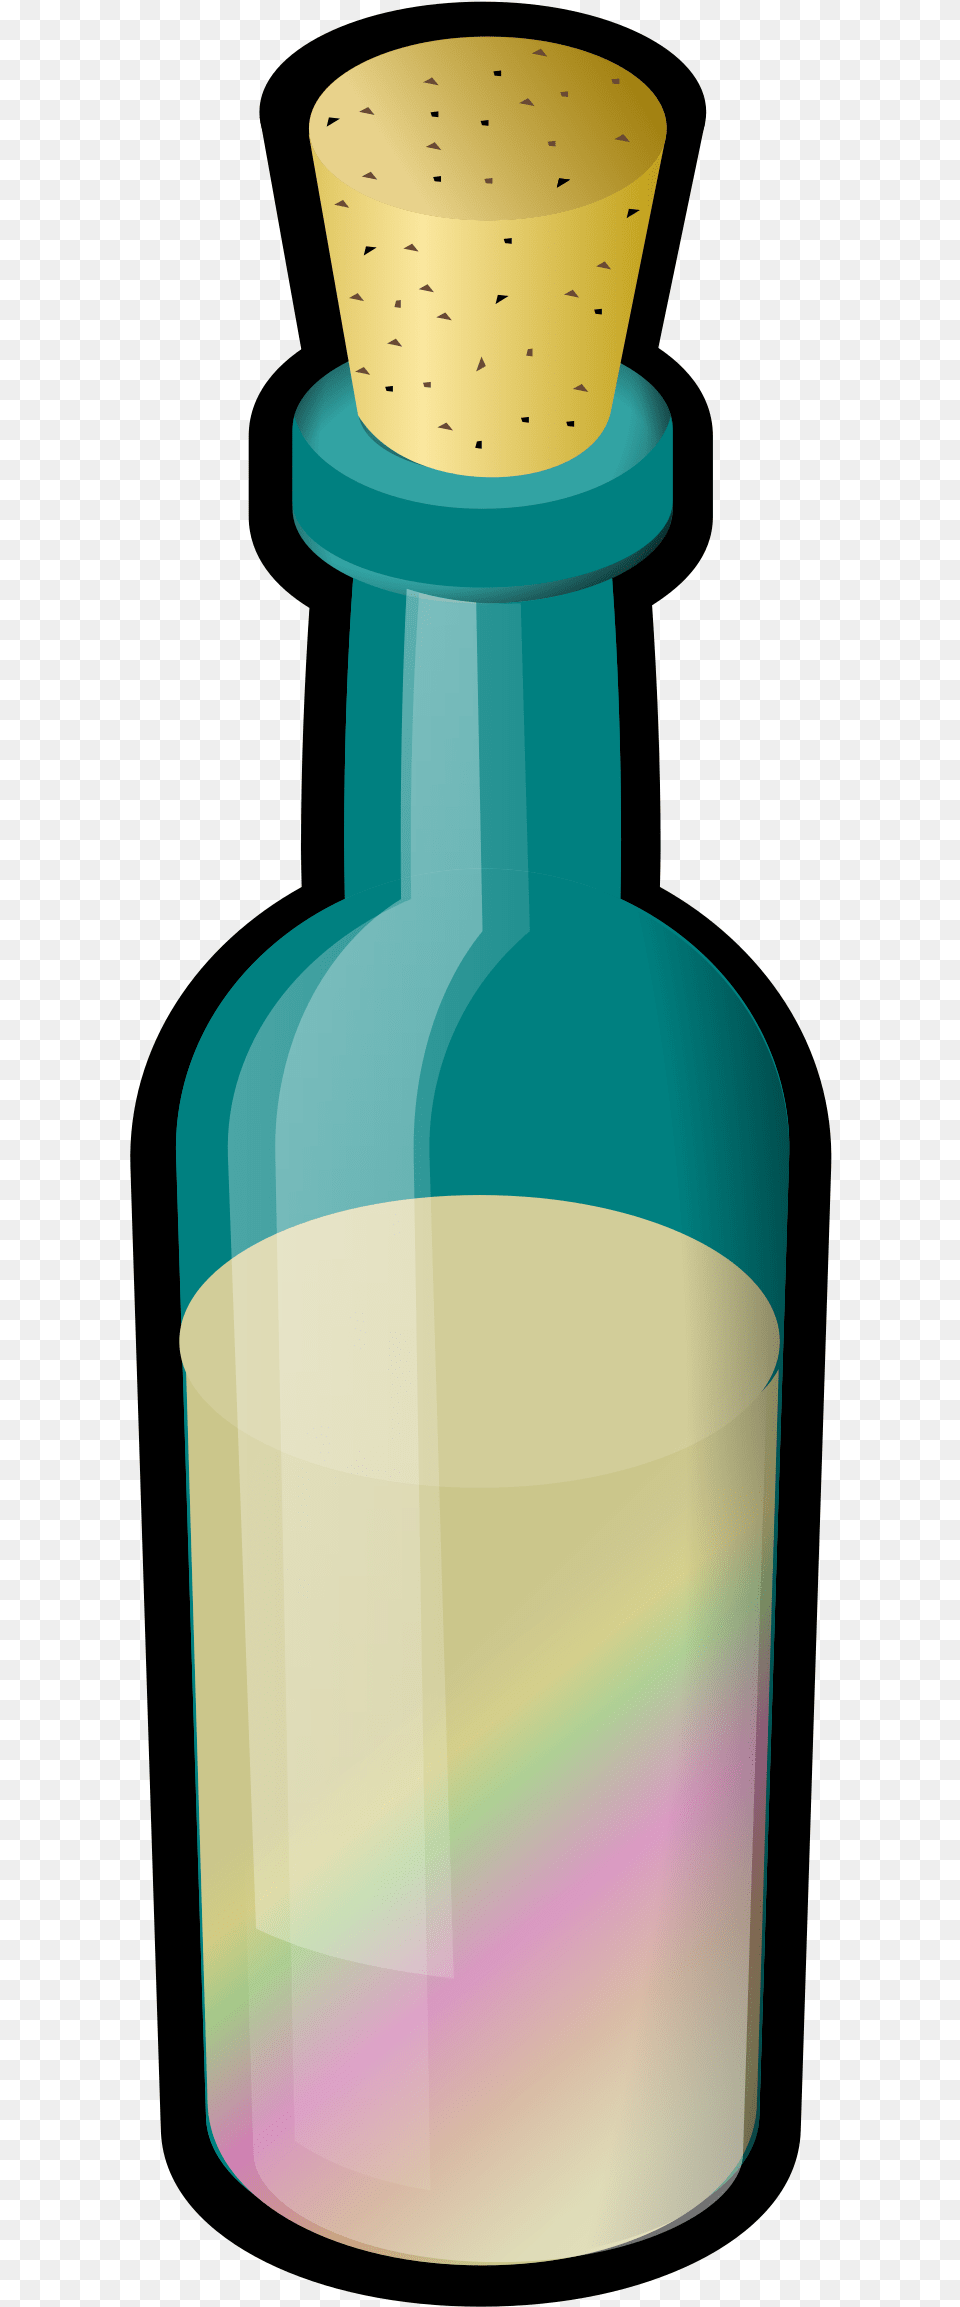 This Icons Design Of Bottle Of Colored Sand, Cork, Cosmetics, Perfume Png Image